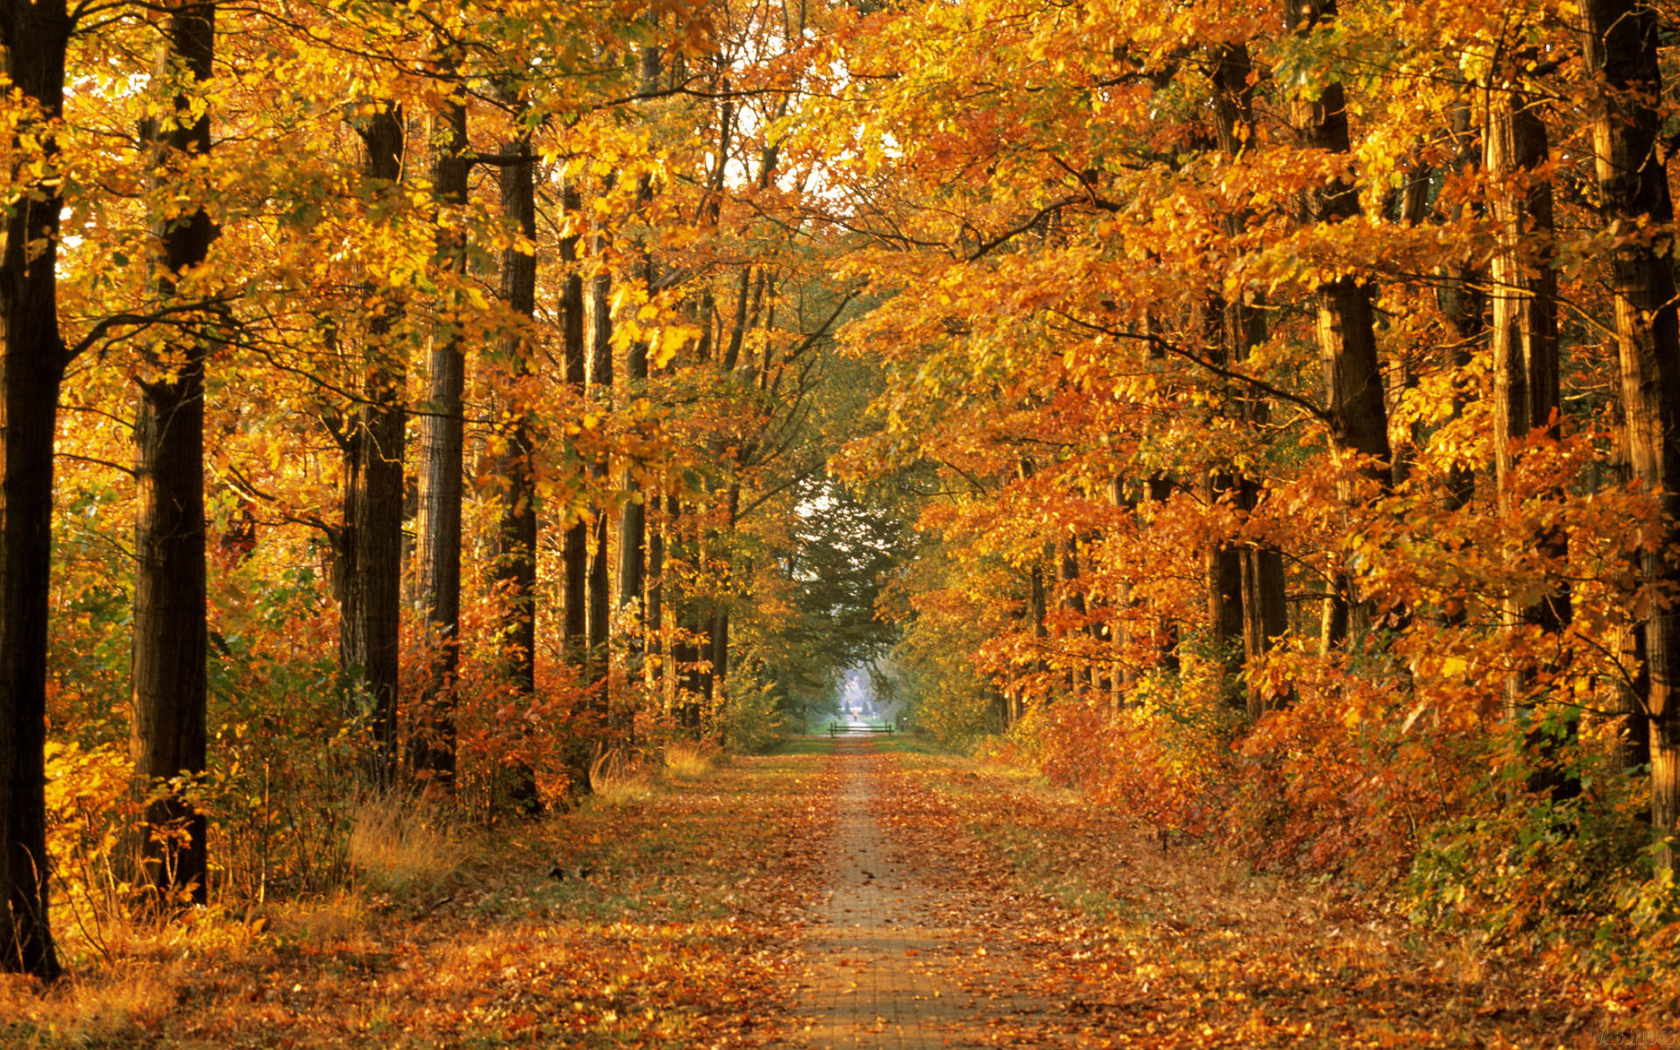 Autumn path with colorful leaves and trees.